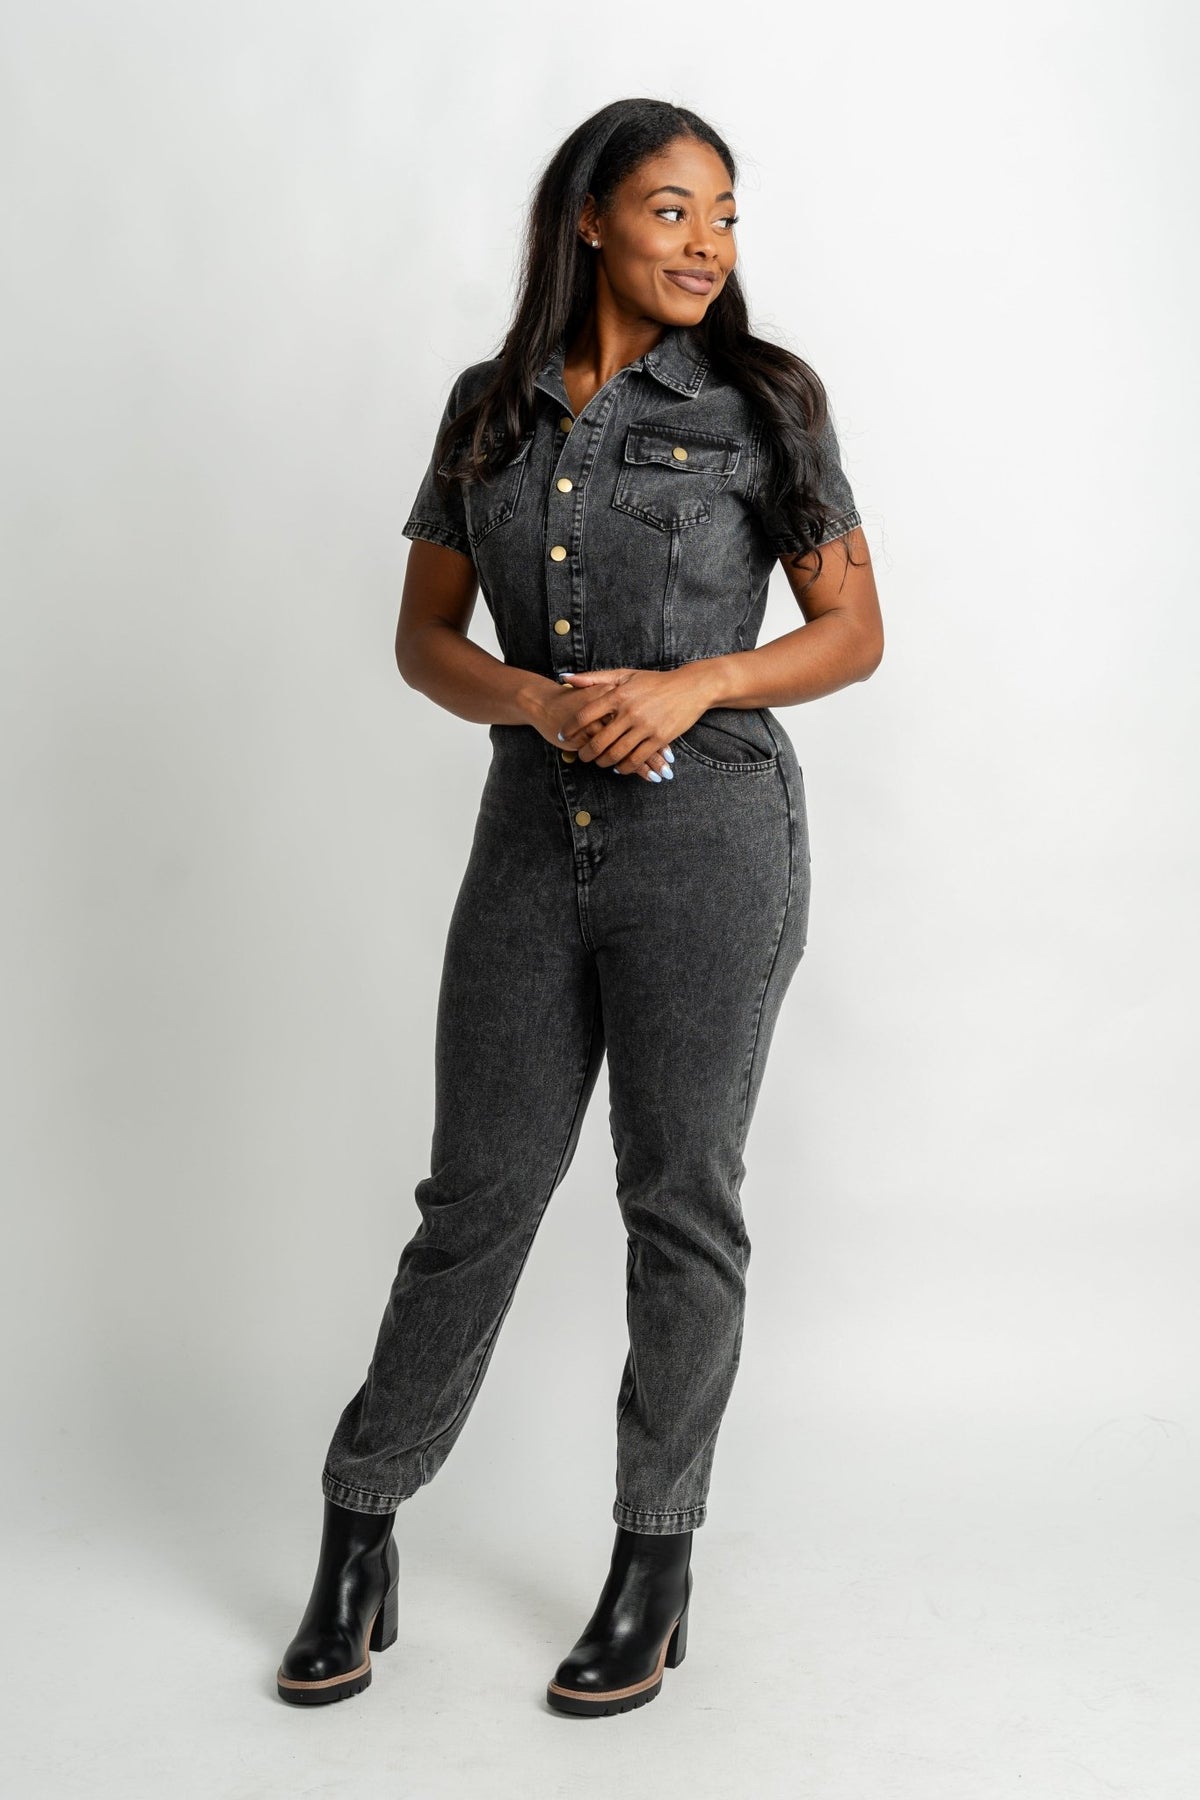 Belted denim jumpsuit black - Cute jumpsuit - Trendy Rompers and Pantsuits at Lush Fashion Lounge Boutique in Oklahoma City